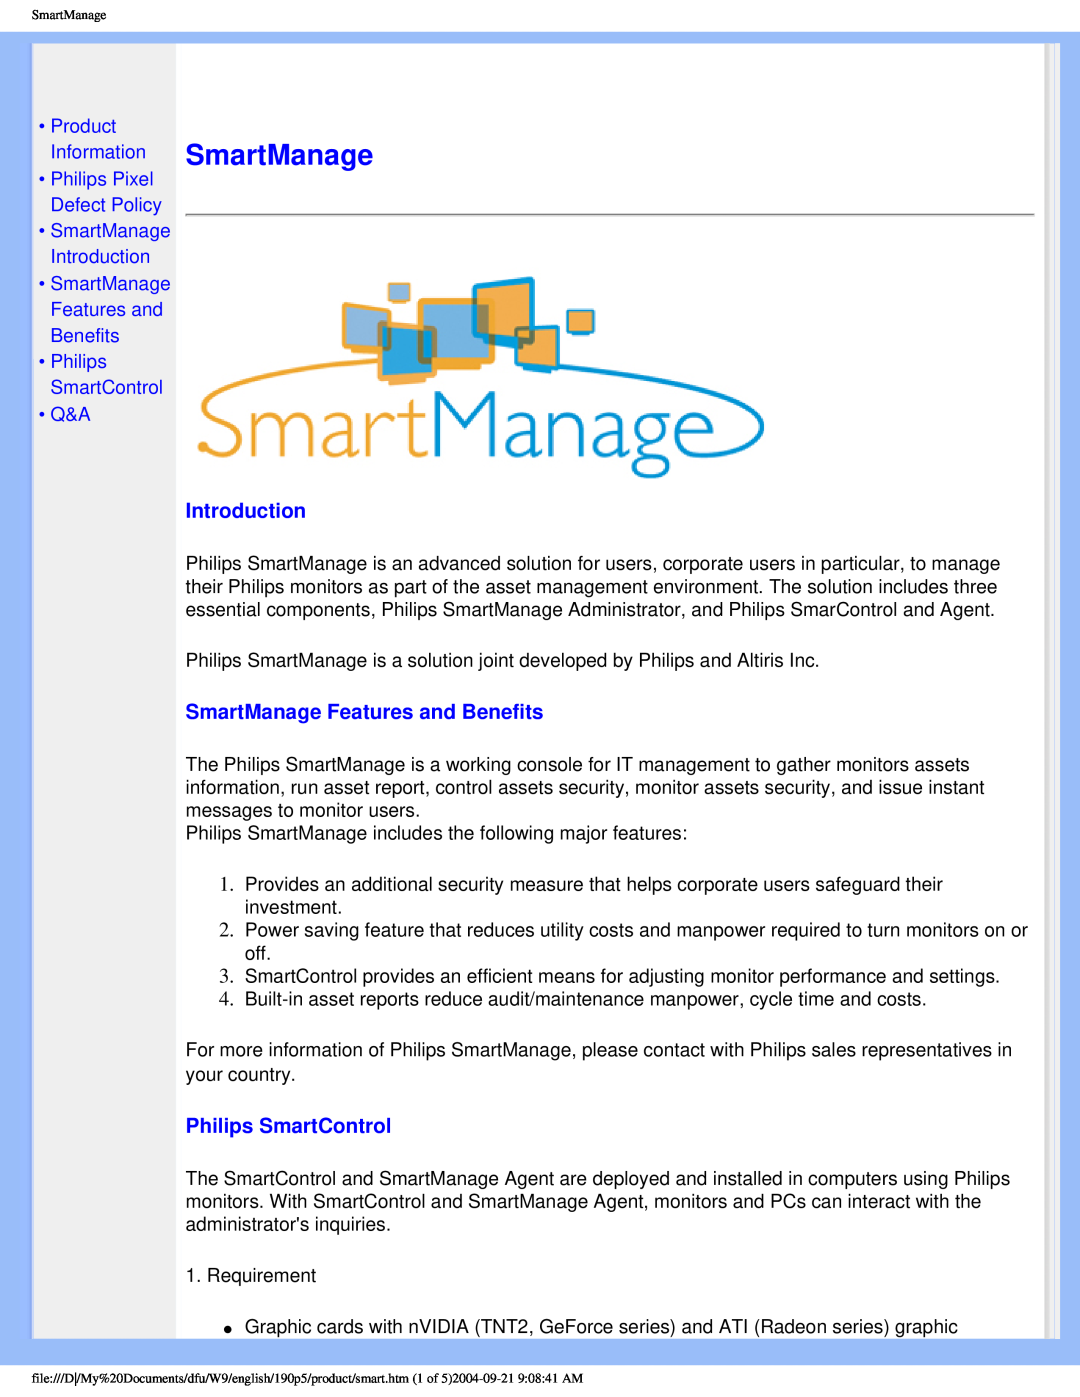 Philips 190PS user manual Introduction, SmartManage Features and Benefits, Philips SmartControl Q&A 